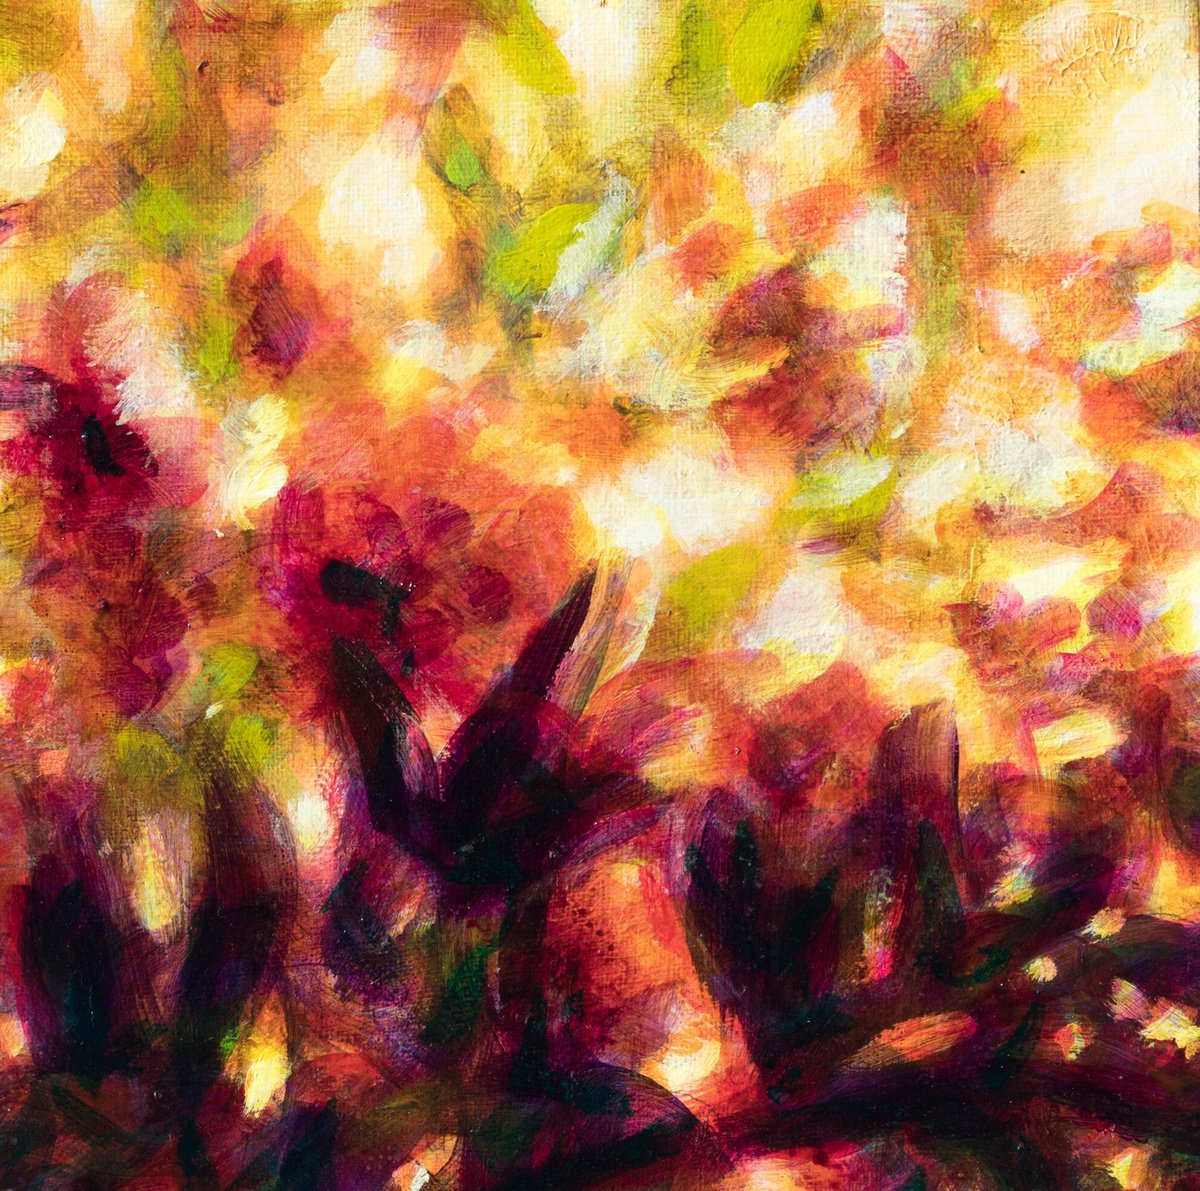 Autumn flowers - floral abstract by Fabienne Monestier